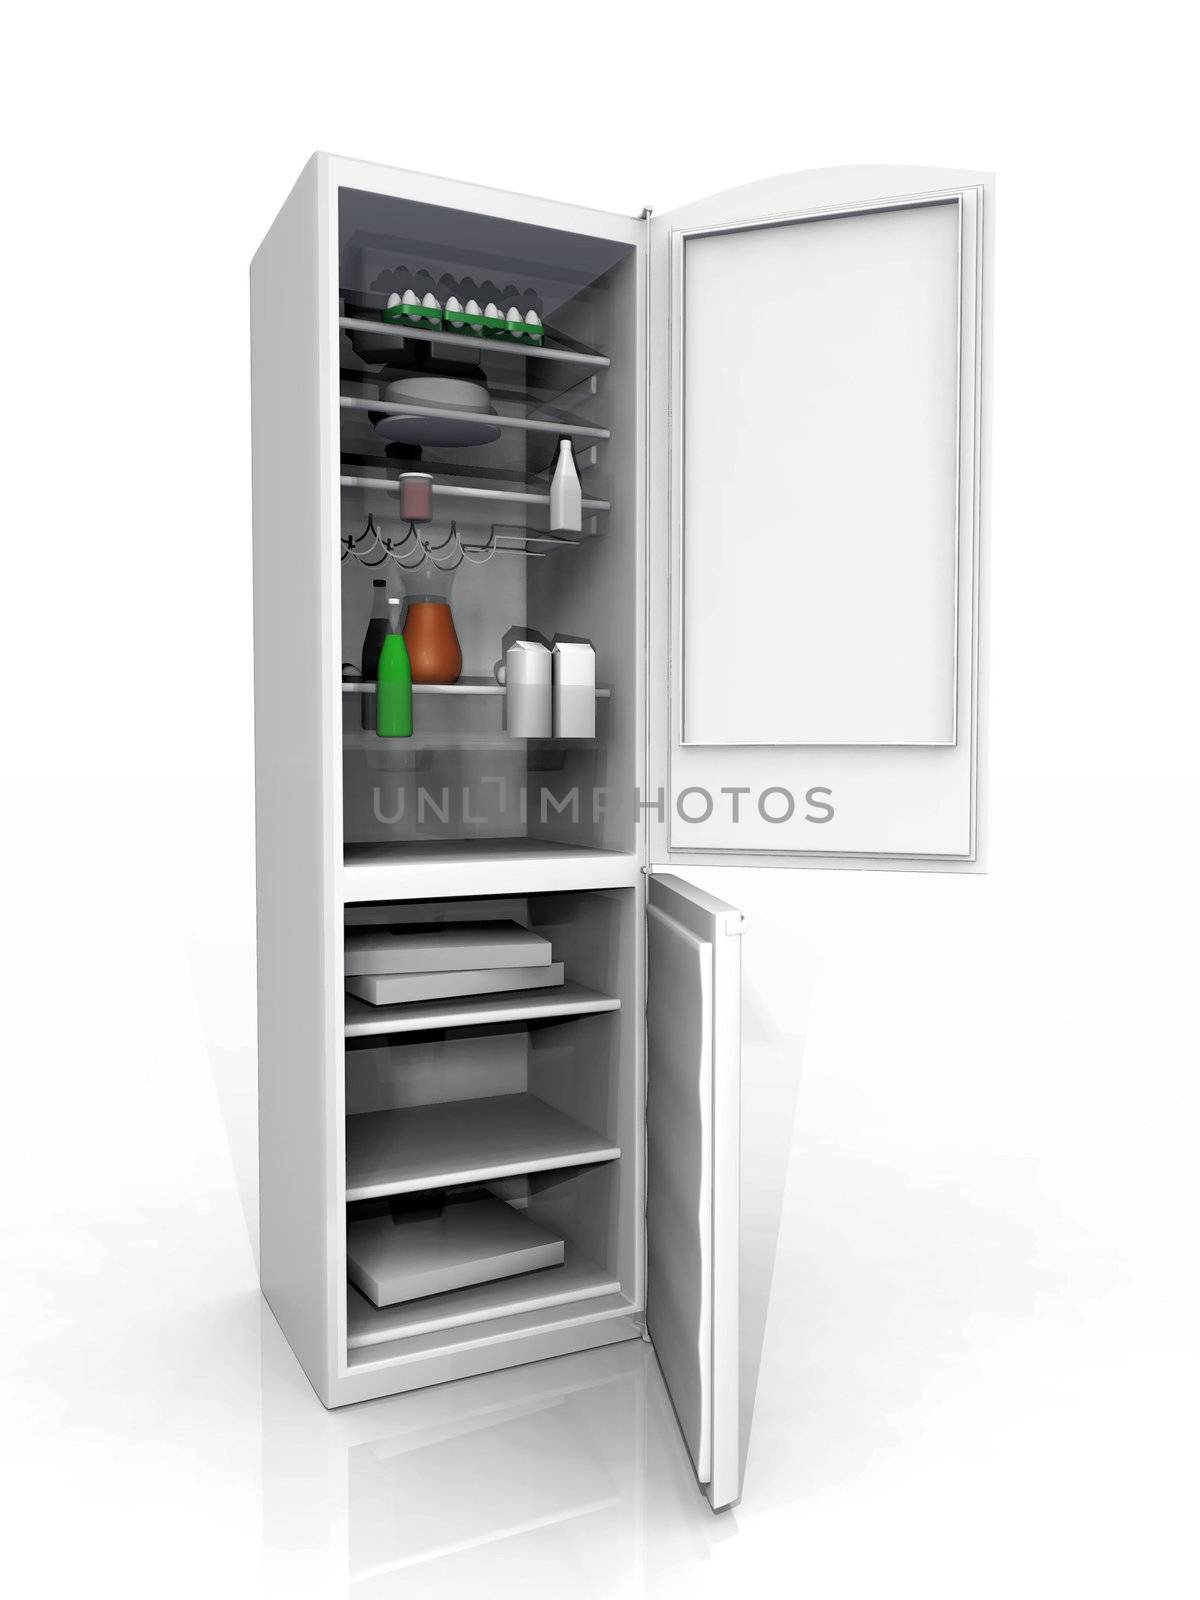 the refrigerator and freezer on a white background by njaj